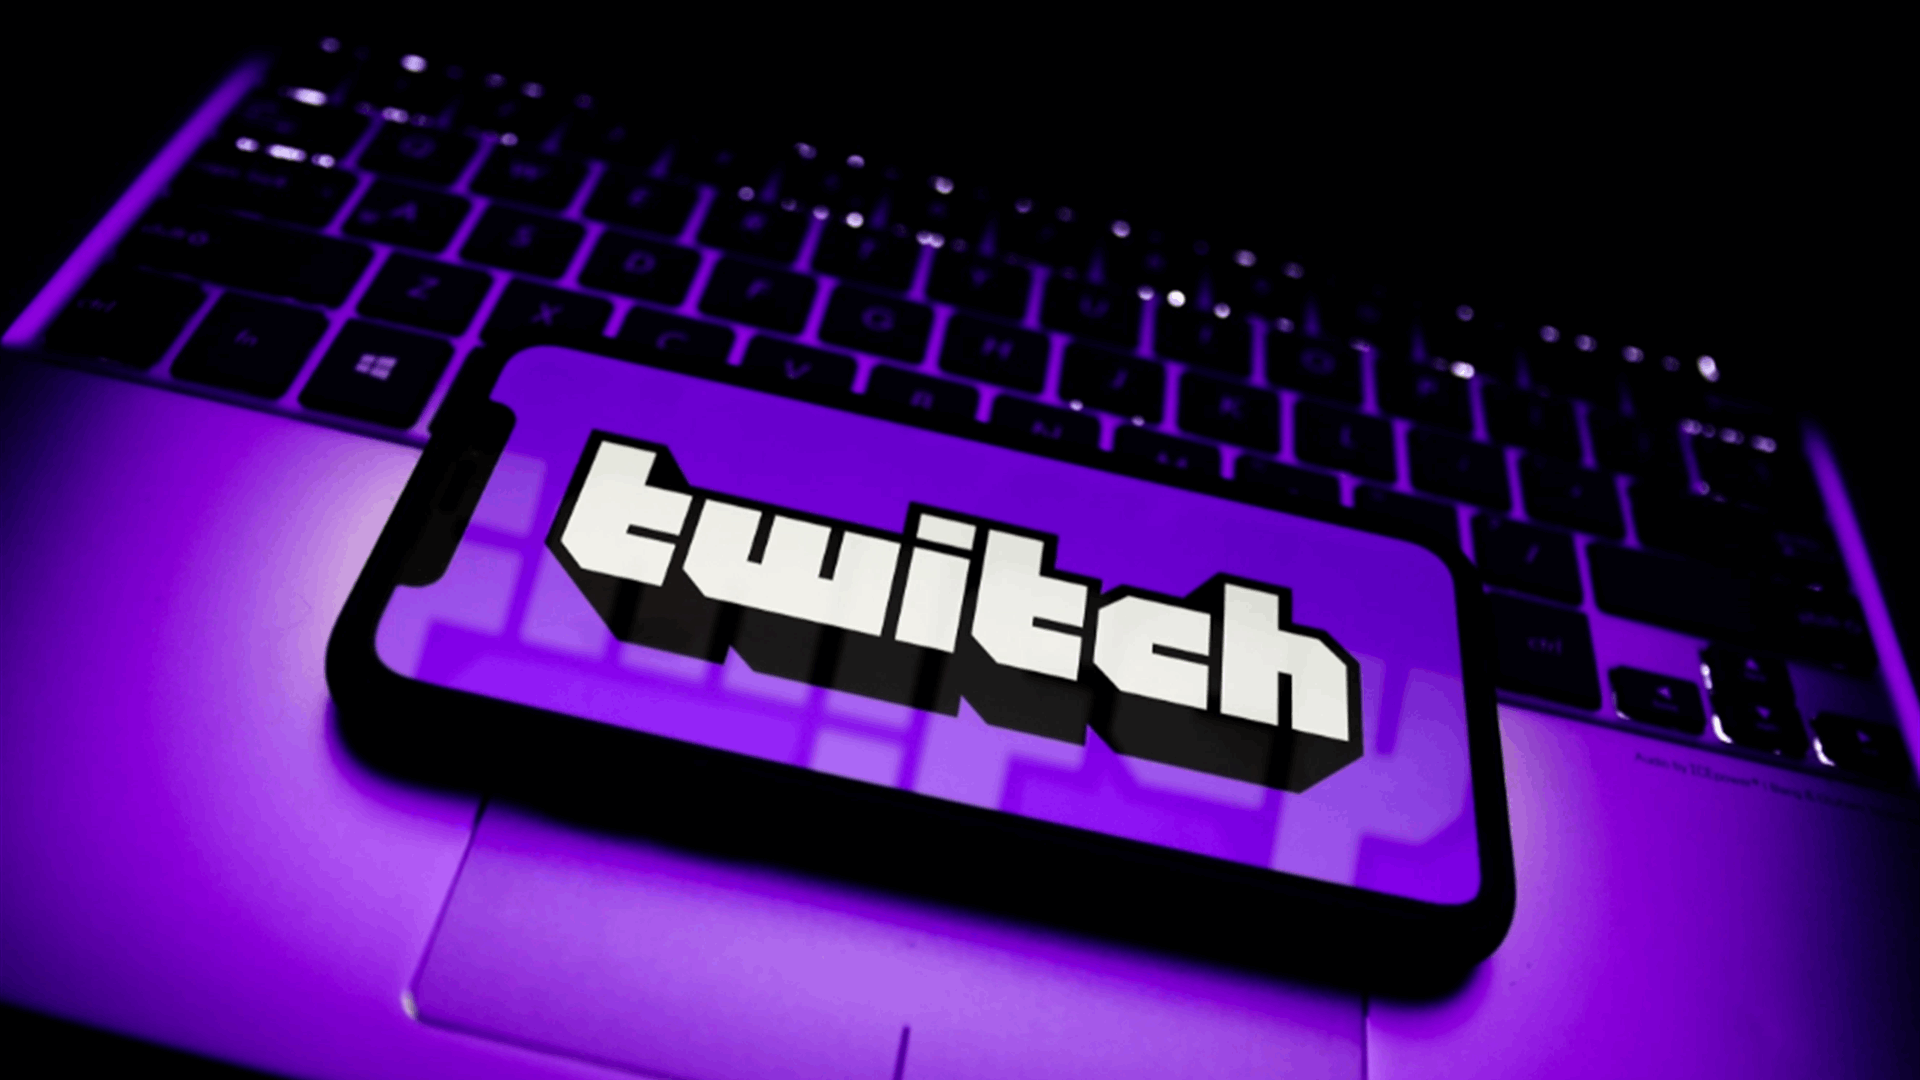 Twitch is launching a discovery feed and other short-form video features